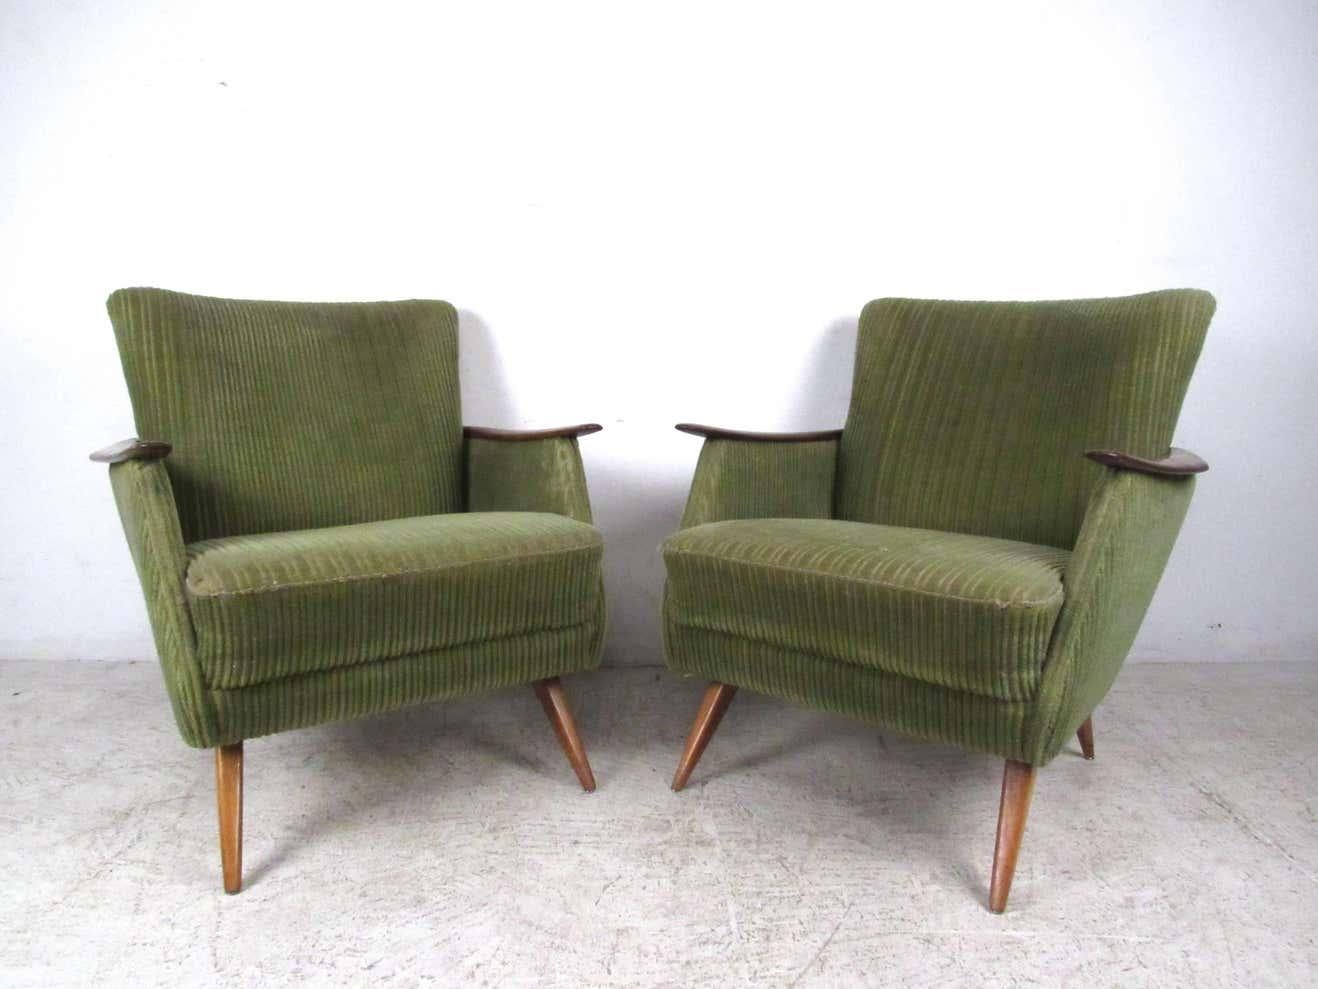 This stunning pair of vintage Danish armchairs features unique tapered legs, sculpted wooden arms, and wraparound wood trim. The vintage style and modern comfort of the pair make these a unique addition to any interior.